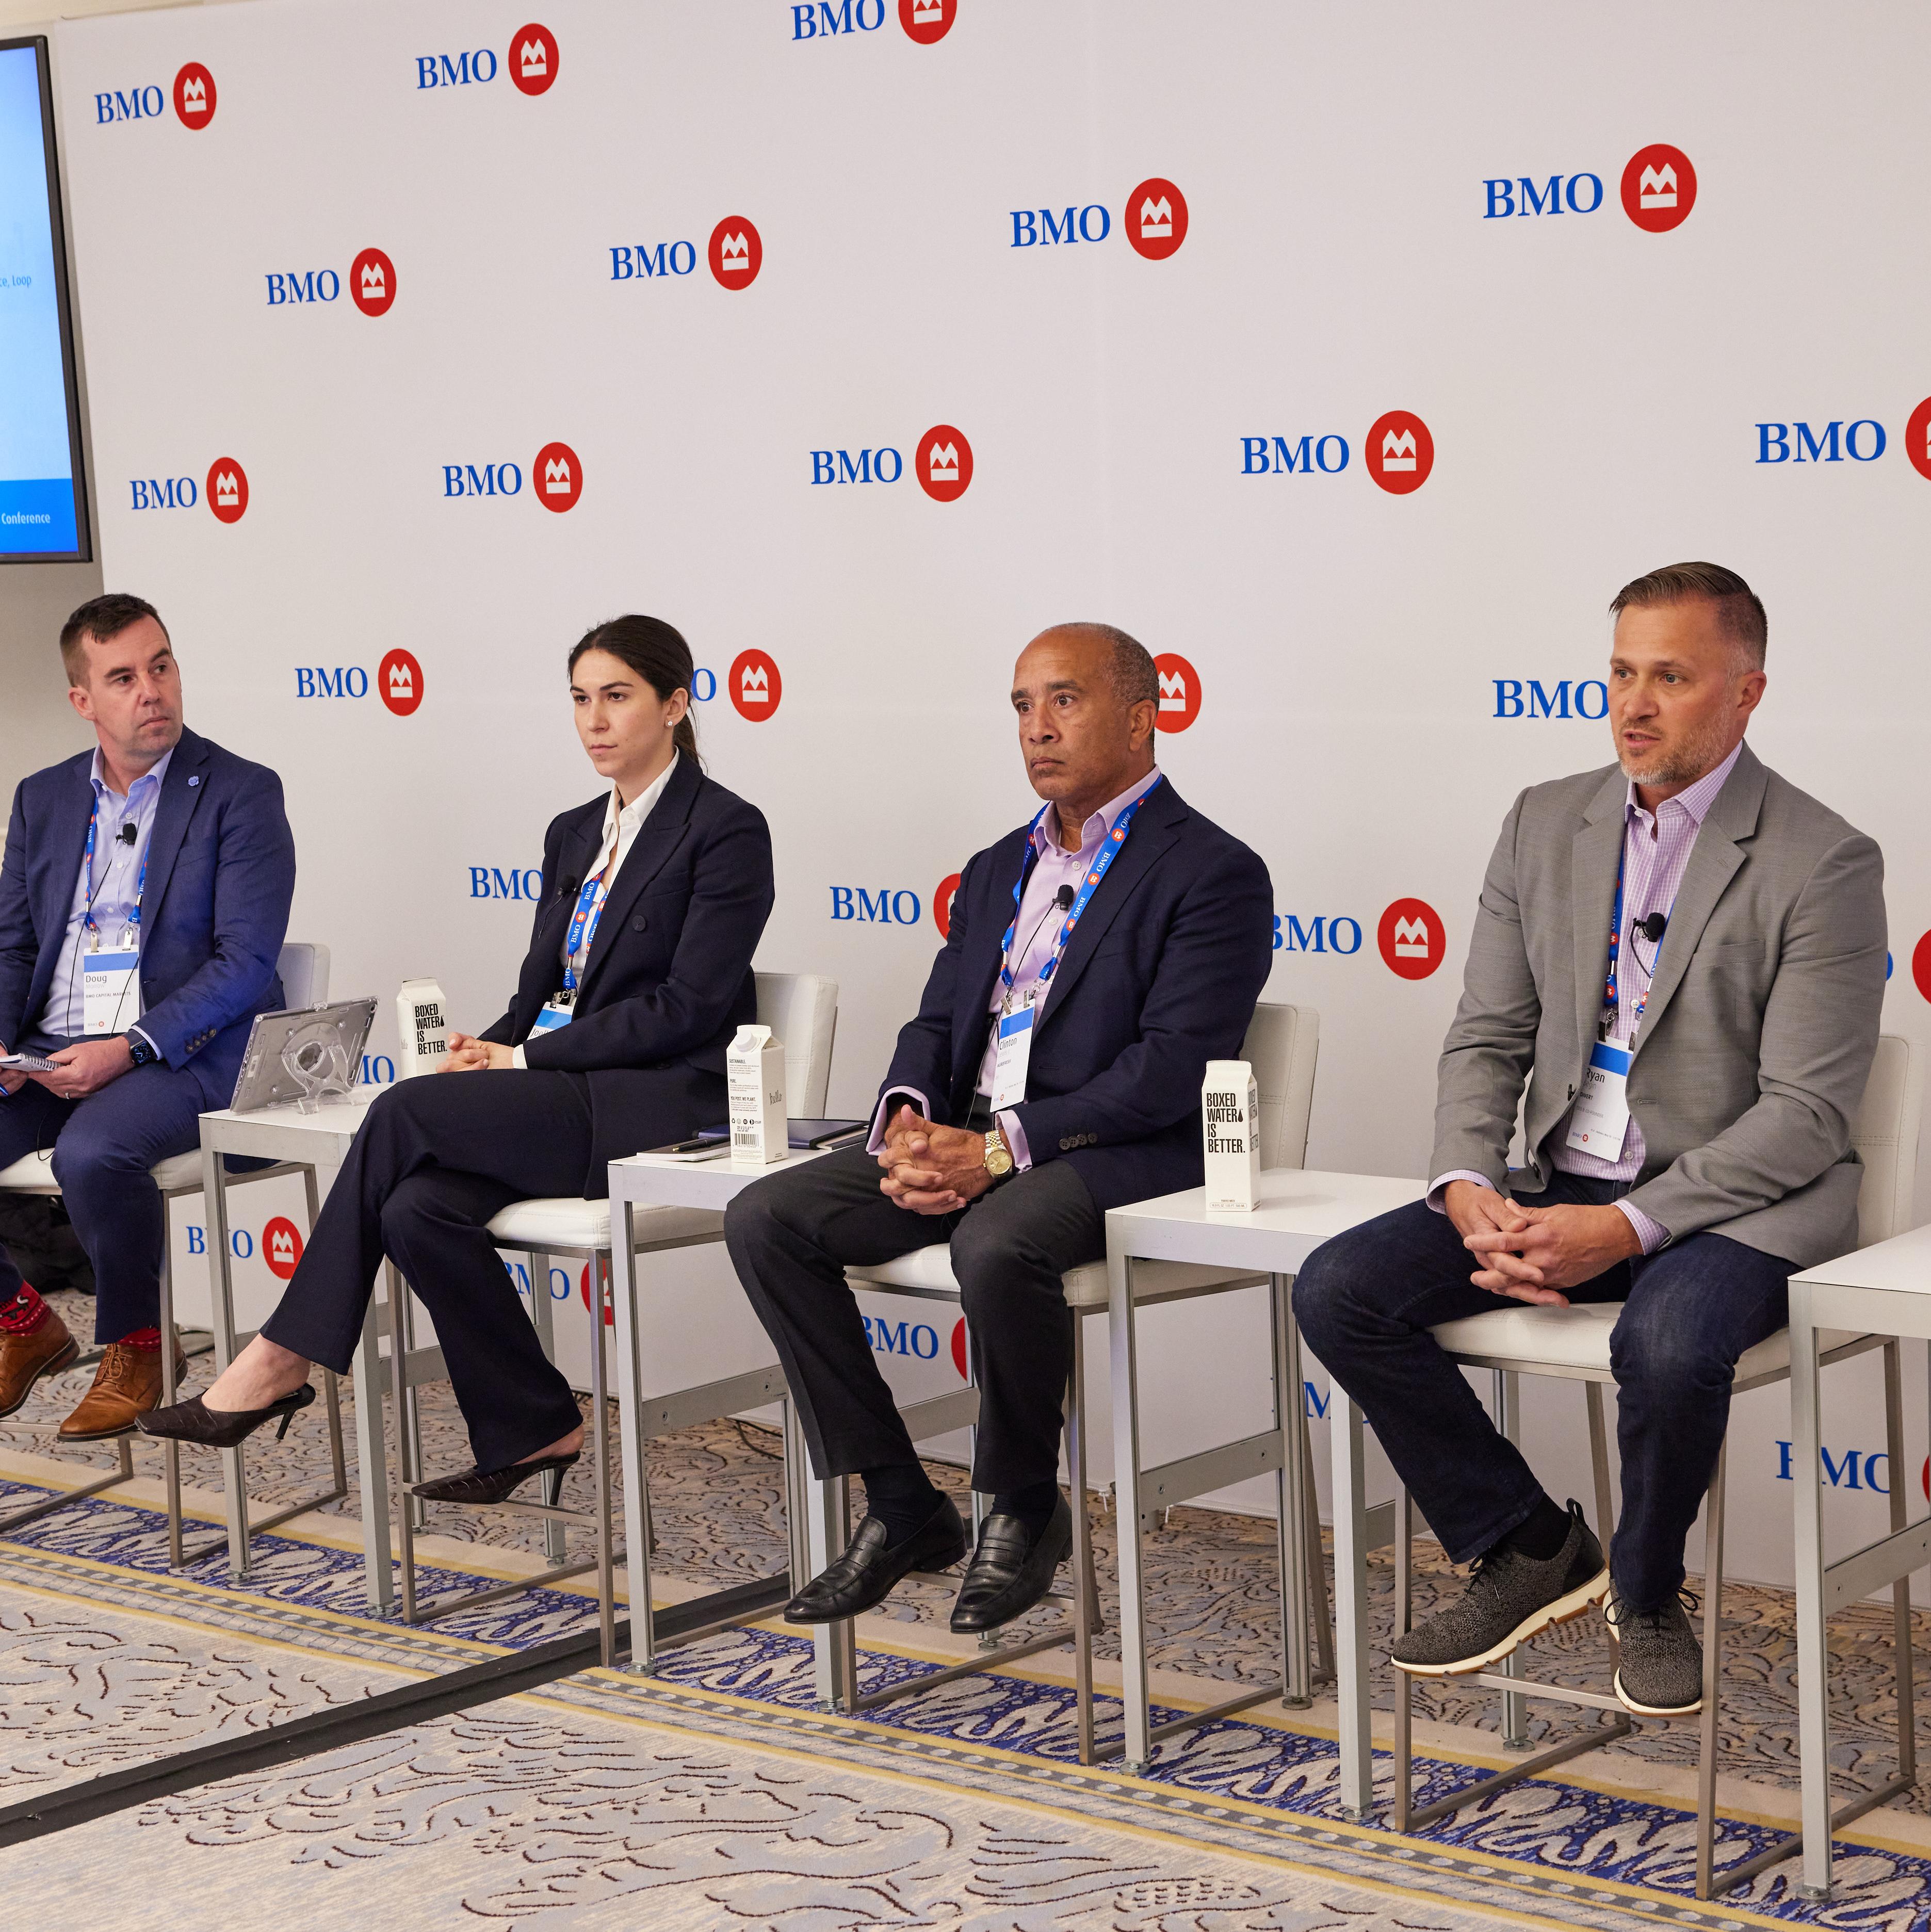 Panelists on the food waste panel at our BMO Global Farm to Market Conference